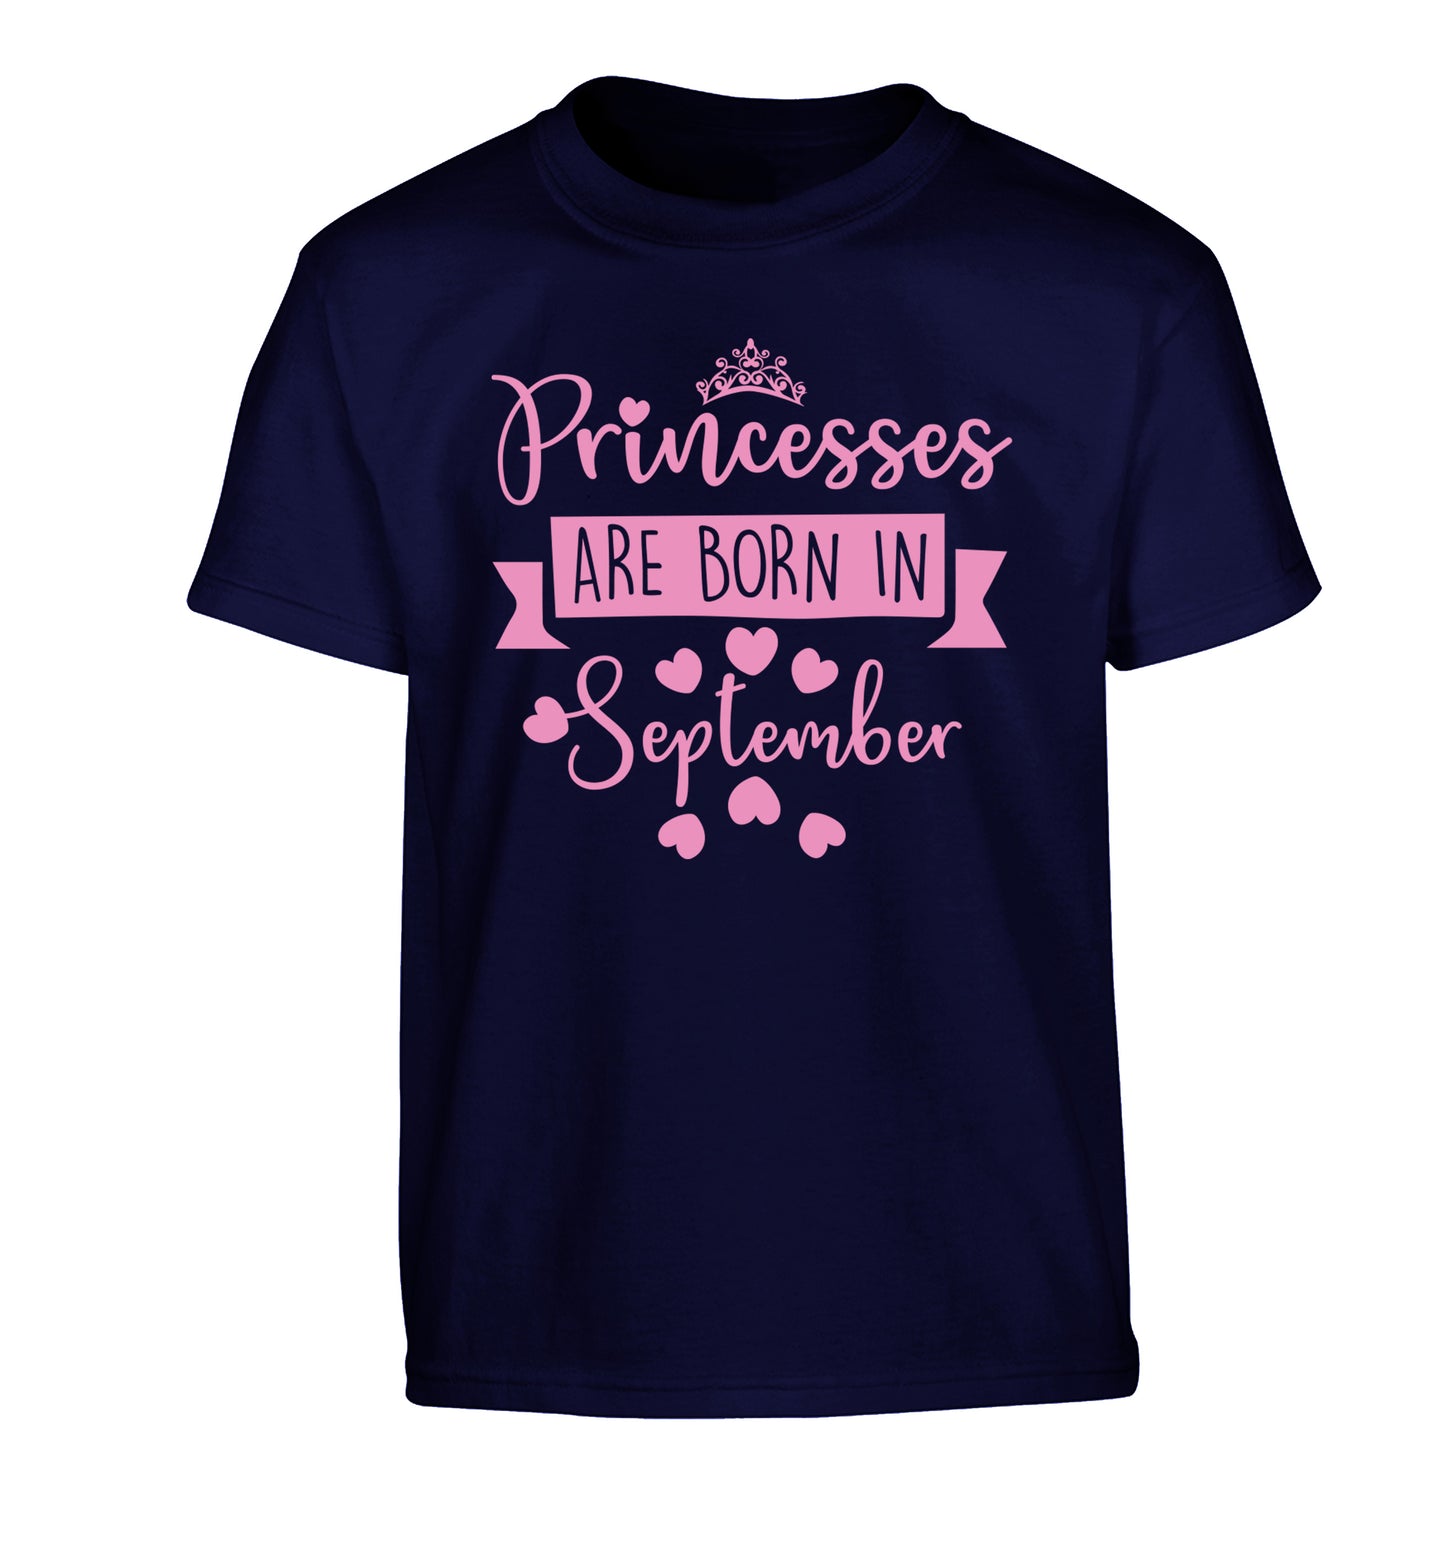 Princesses are born in September Children's navy Tshirt 12-13 Years